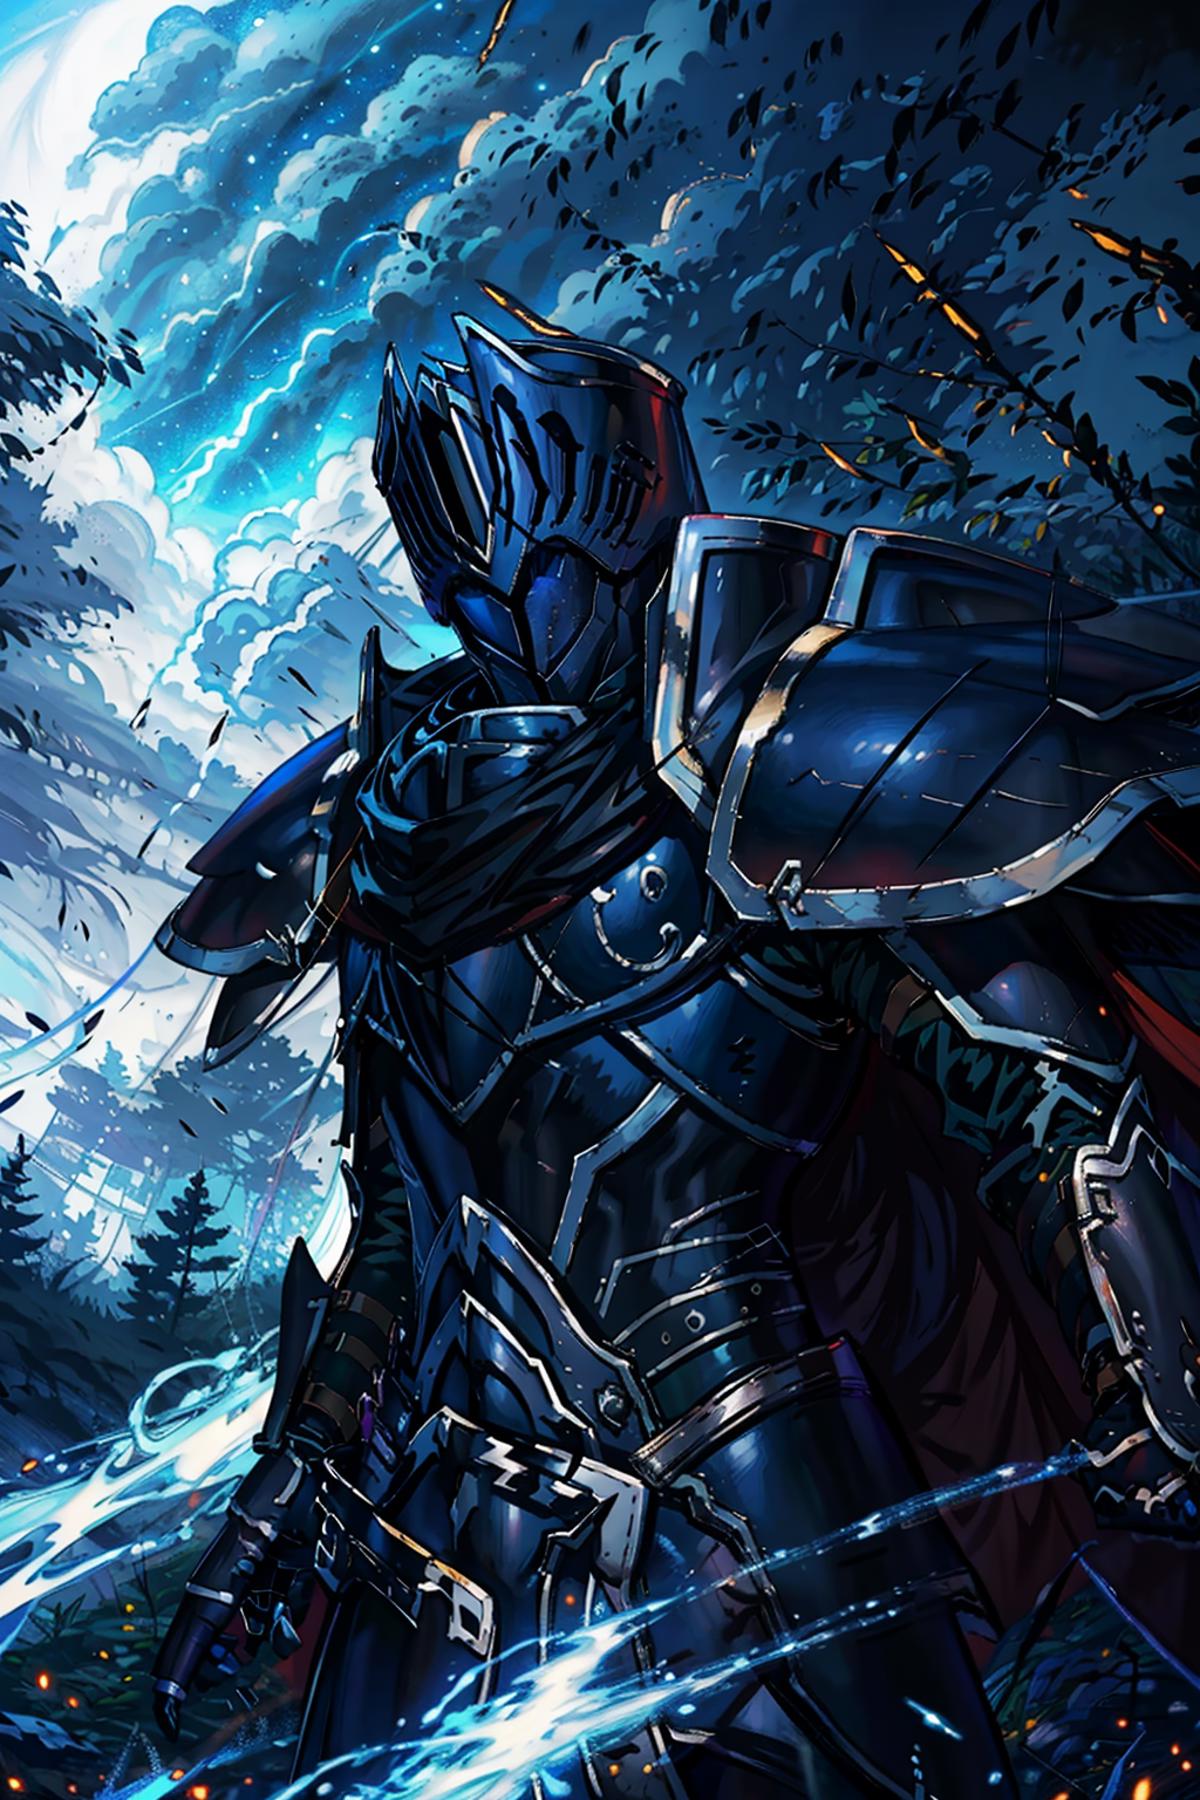 The Black Knight - Fire Emblem image by novowels